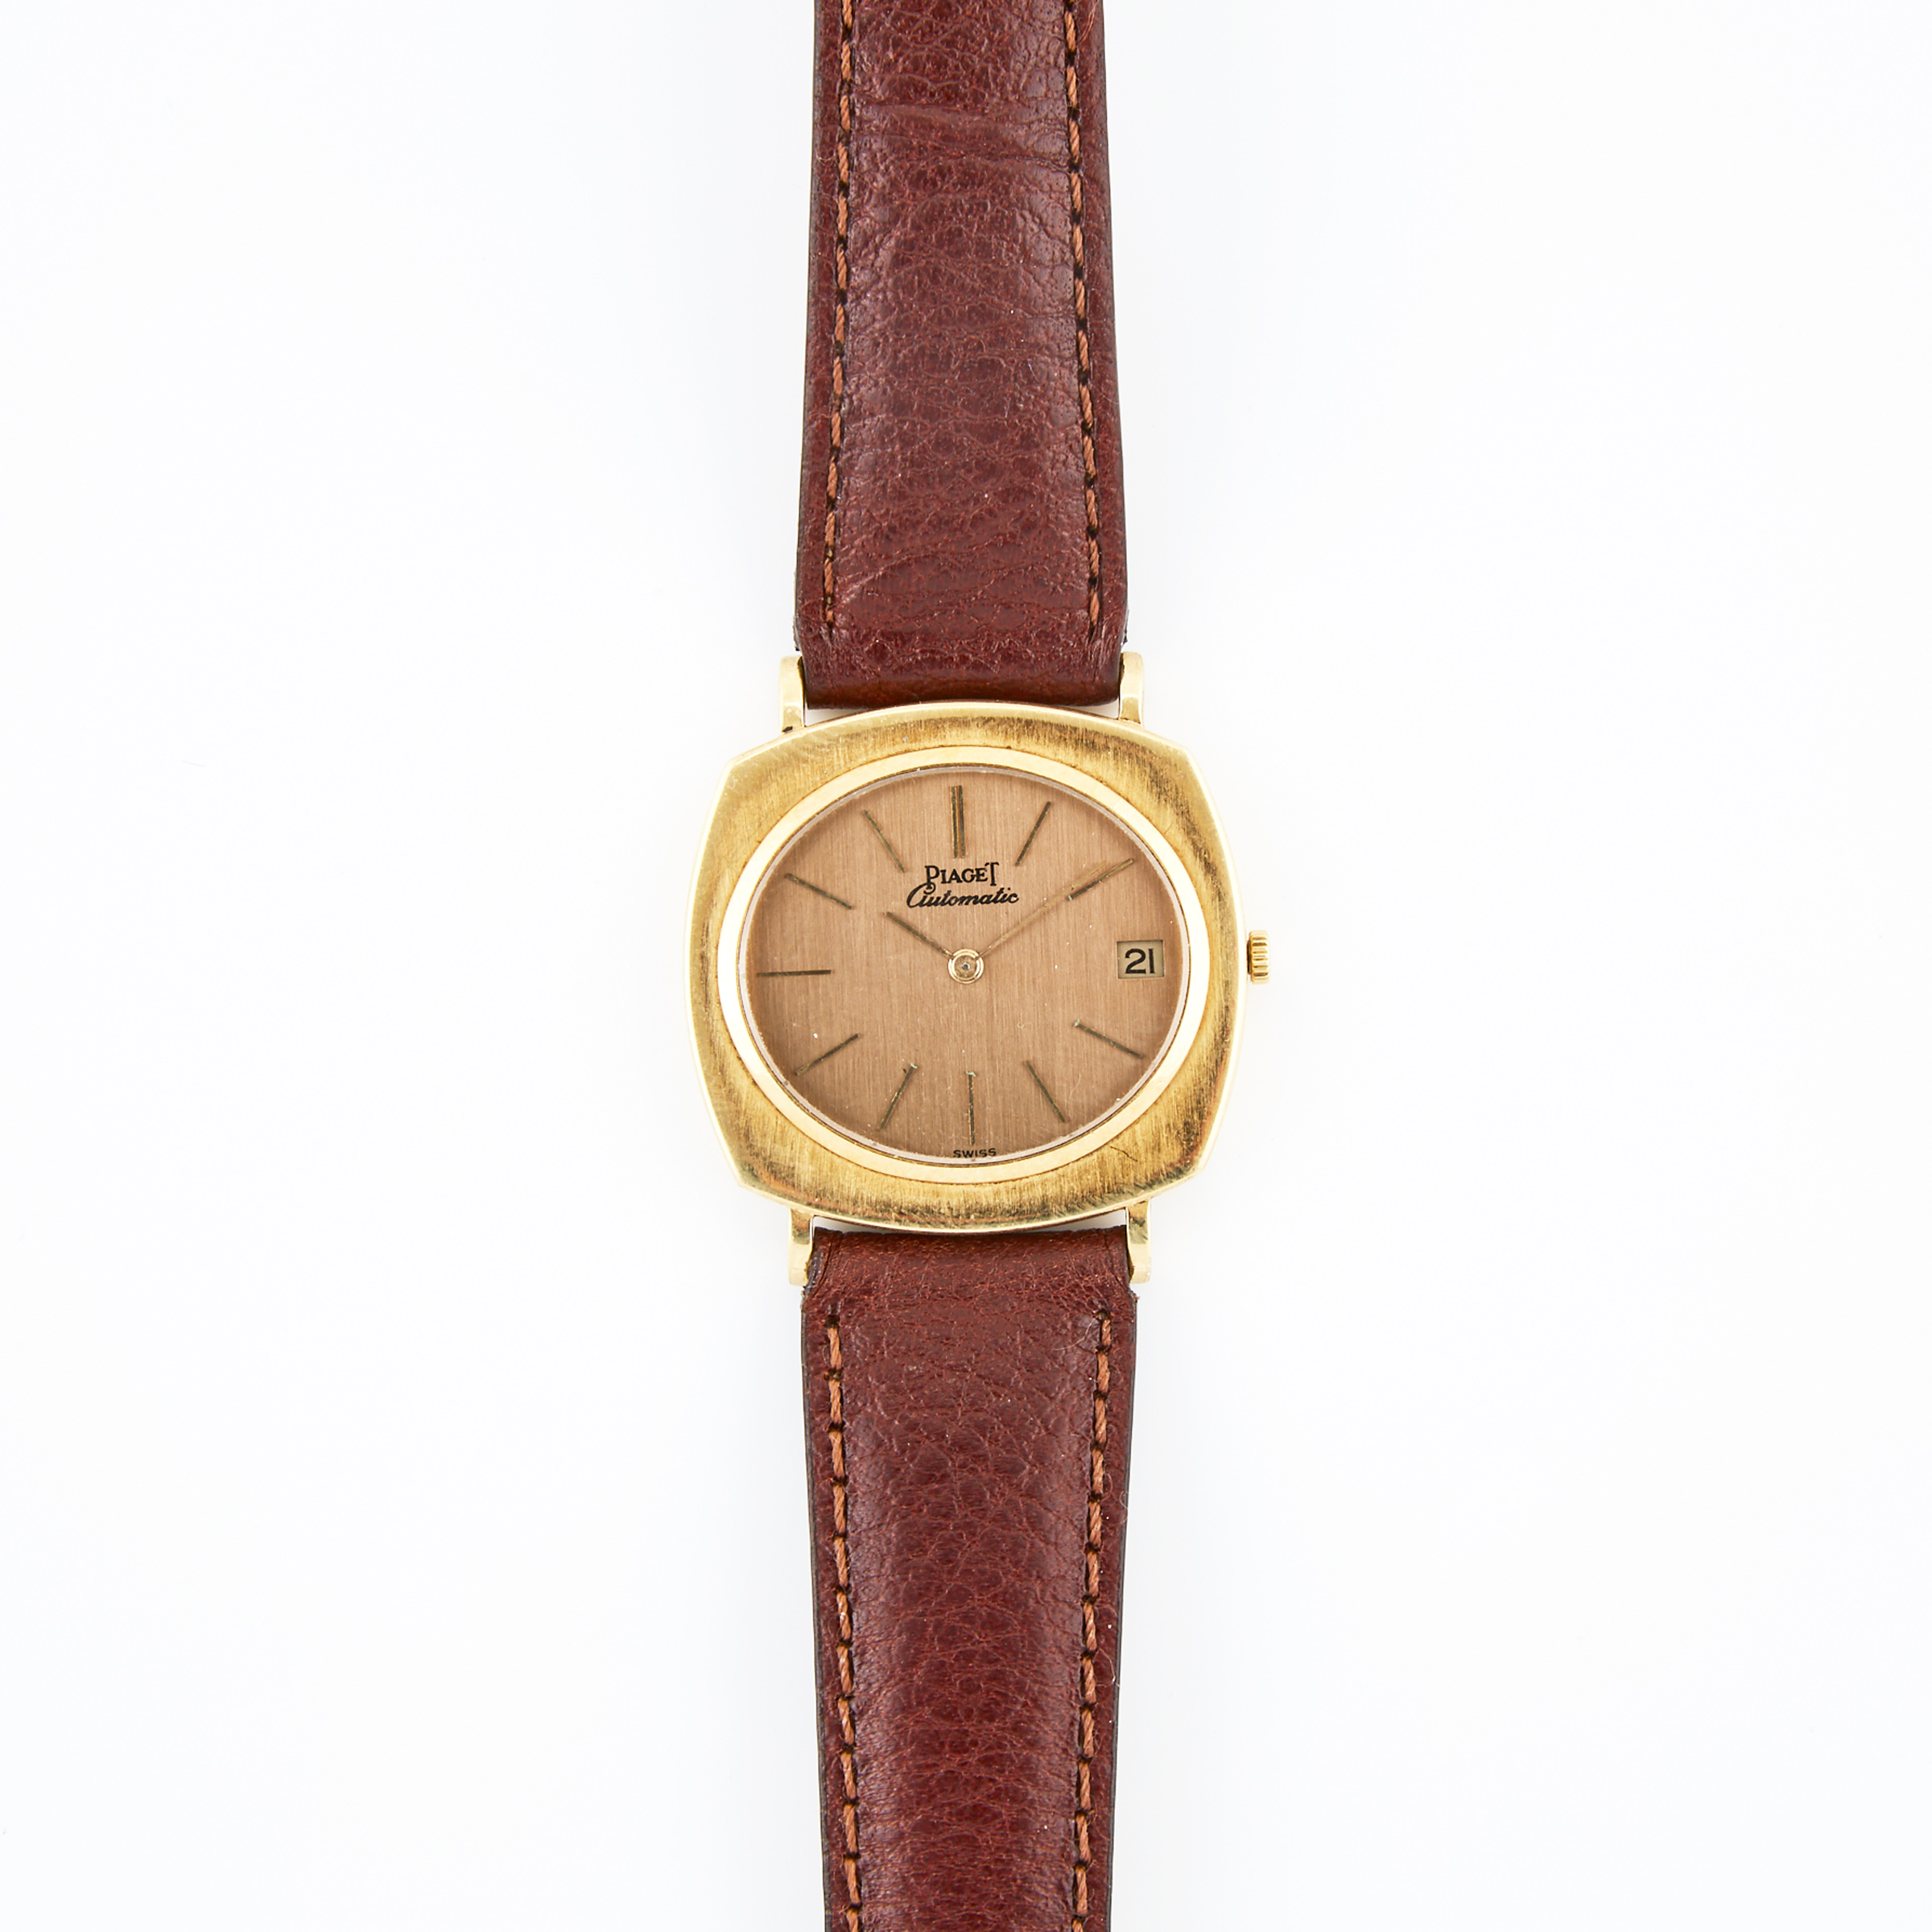 Piaget Altiplano Wristwatch With Date